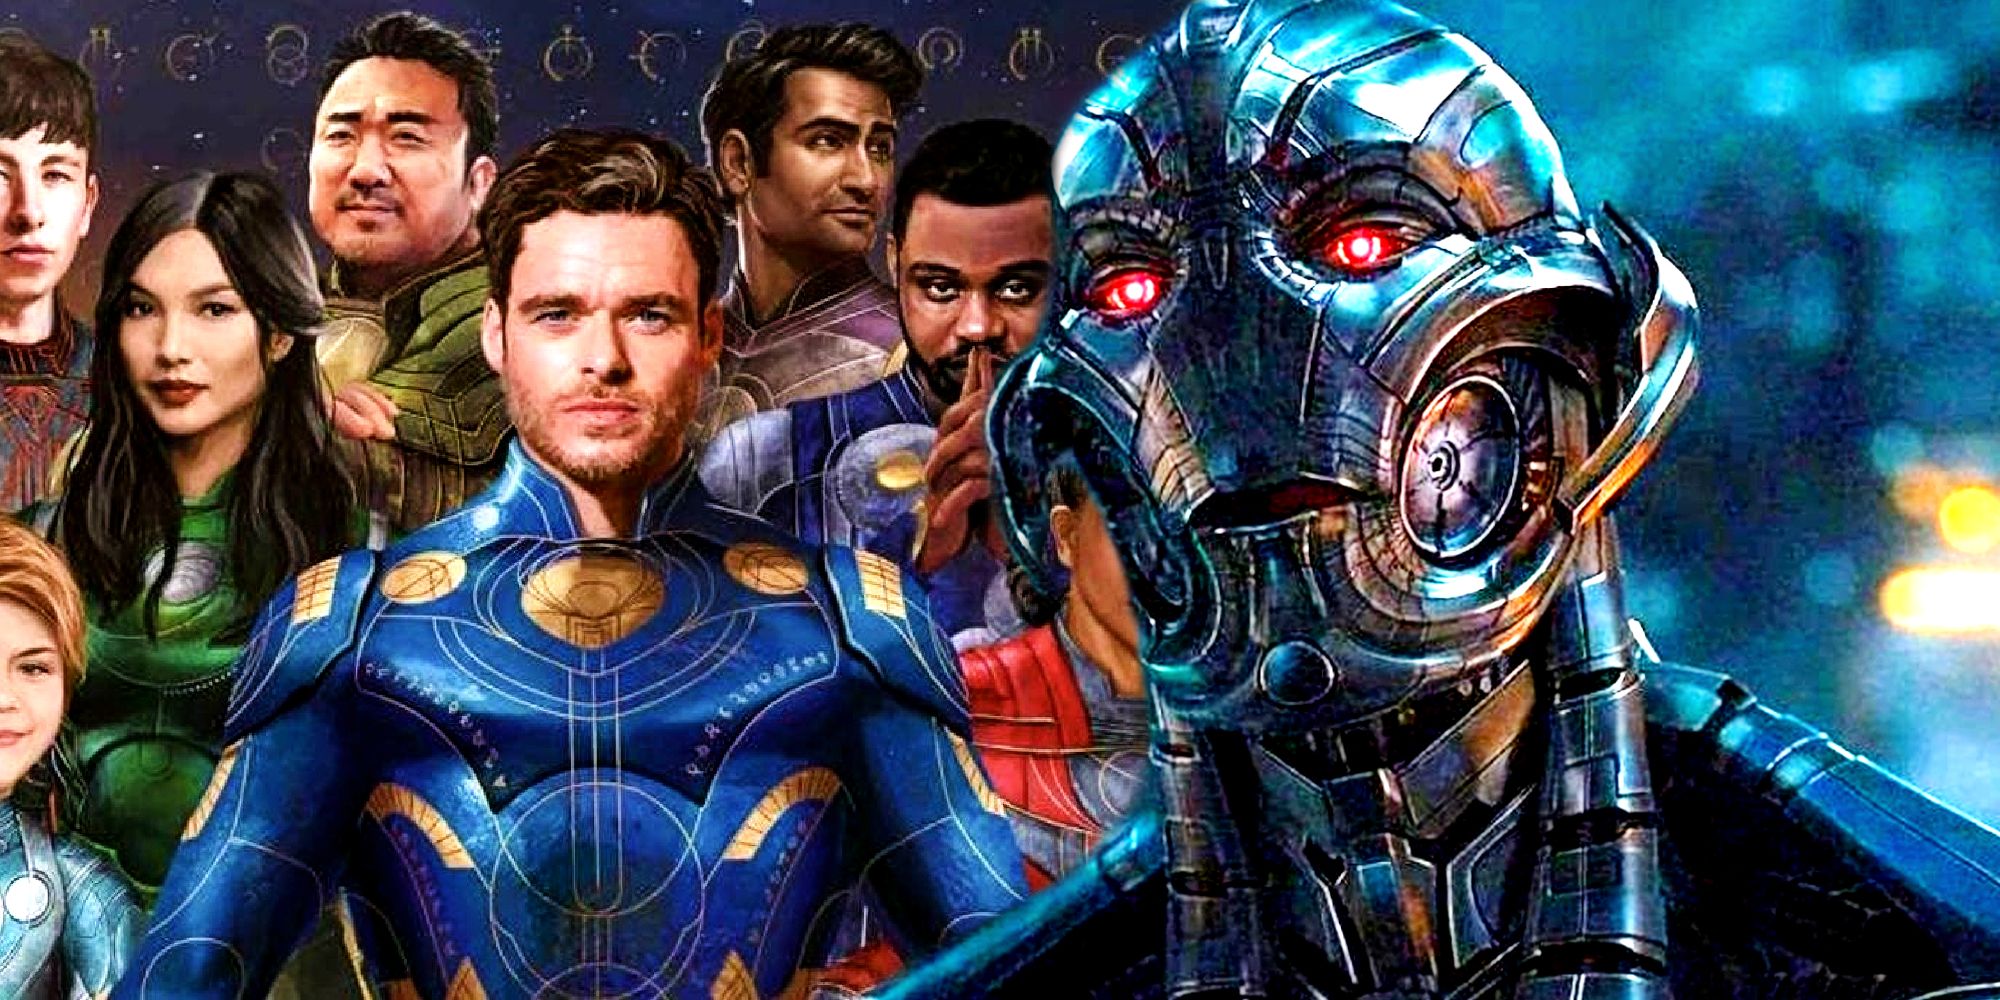 Ultron and the Eternals in the MCU